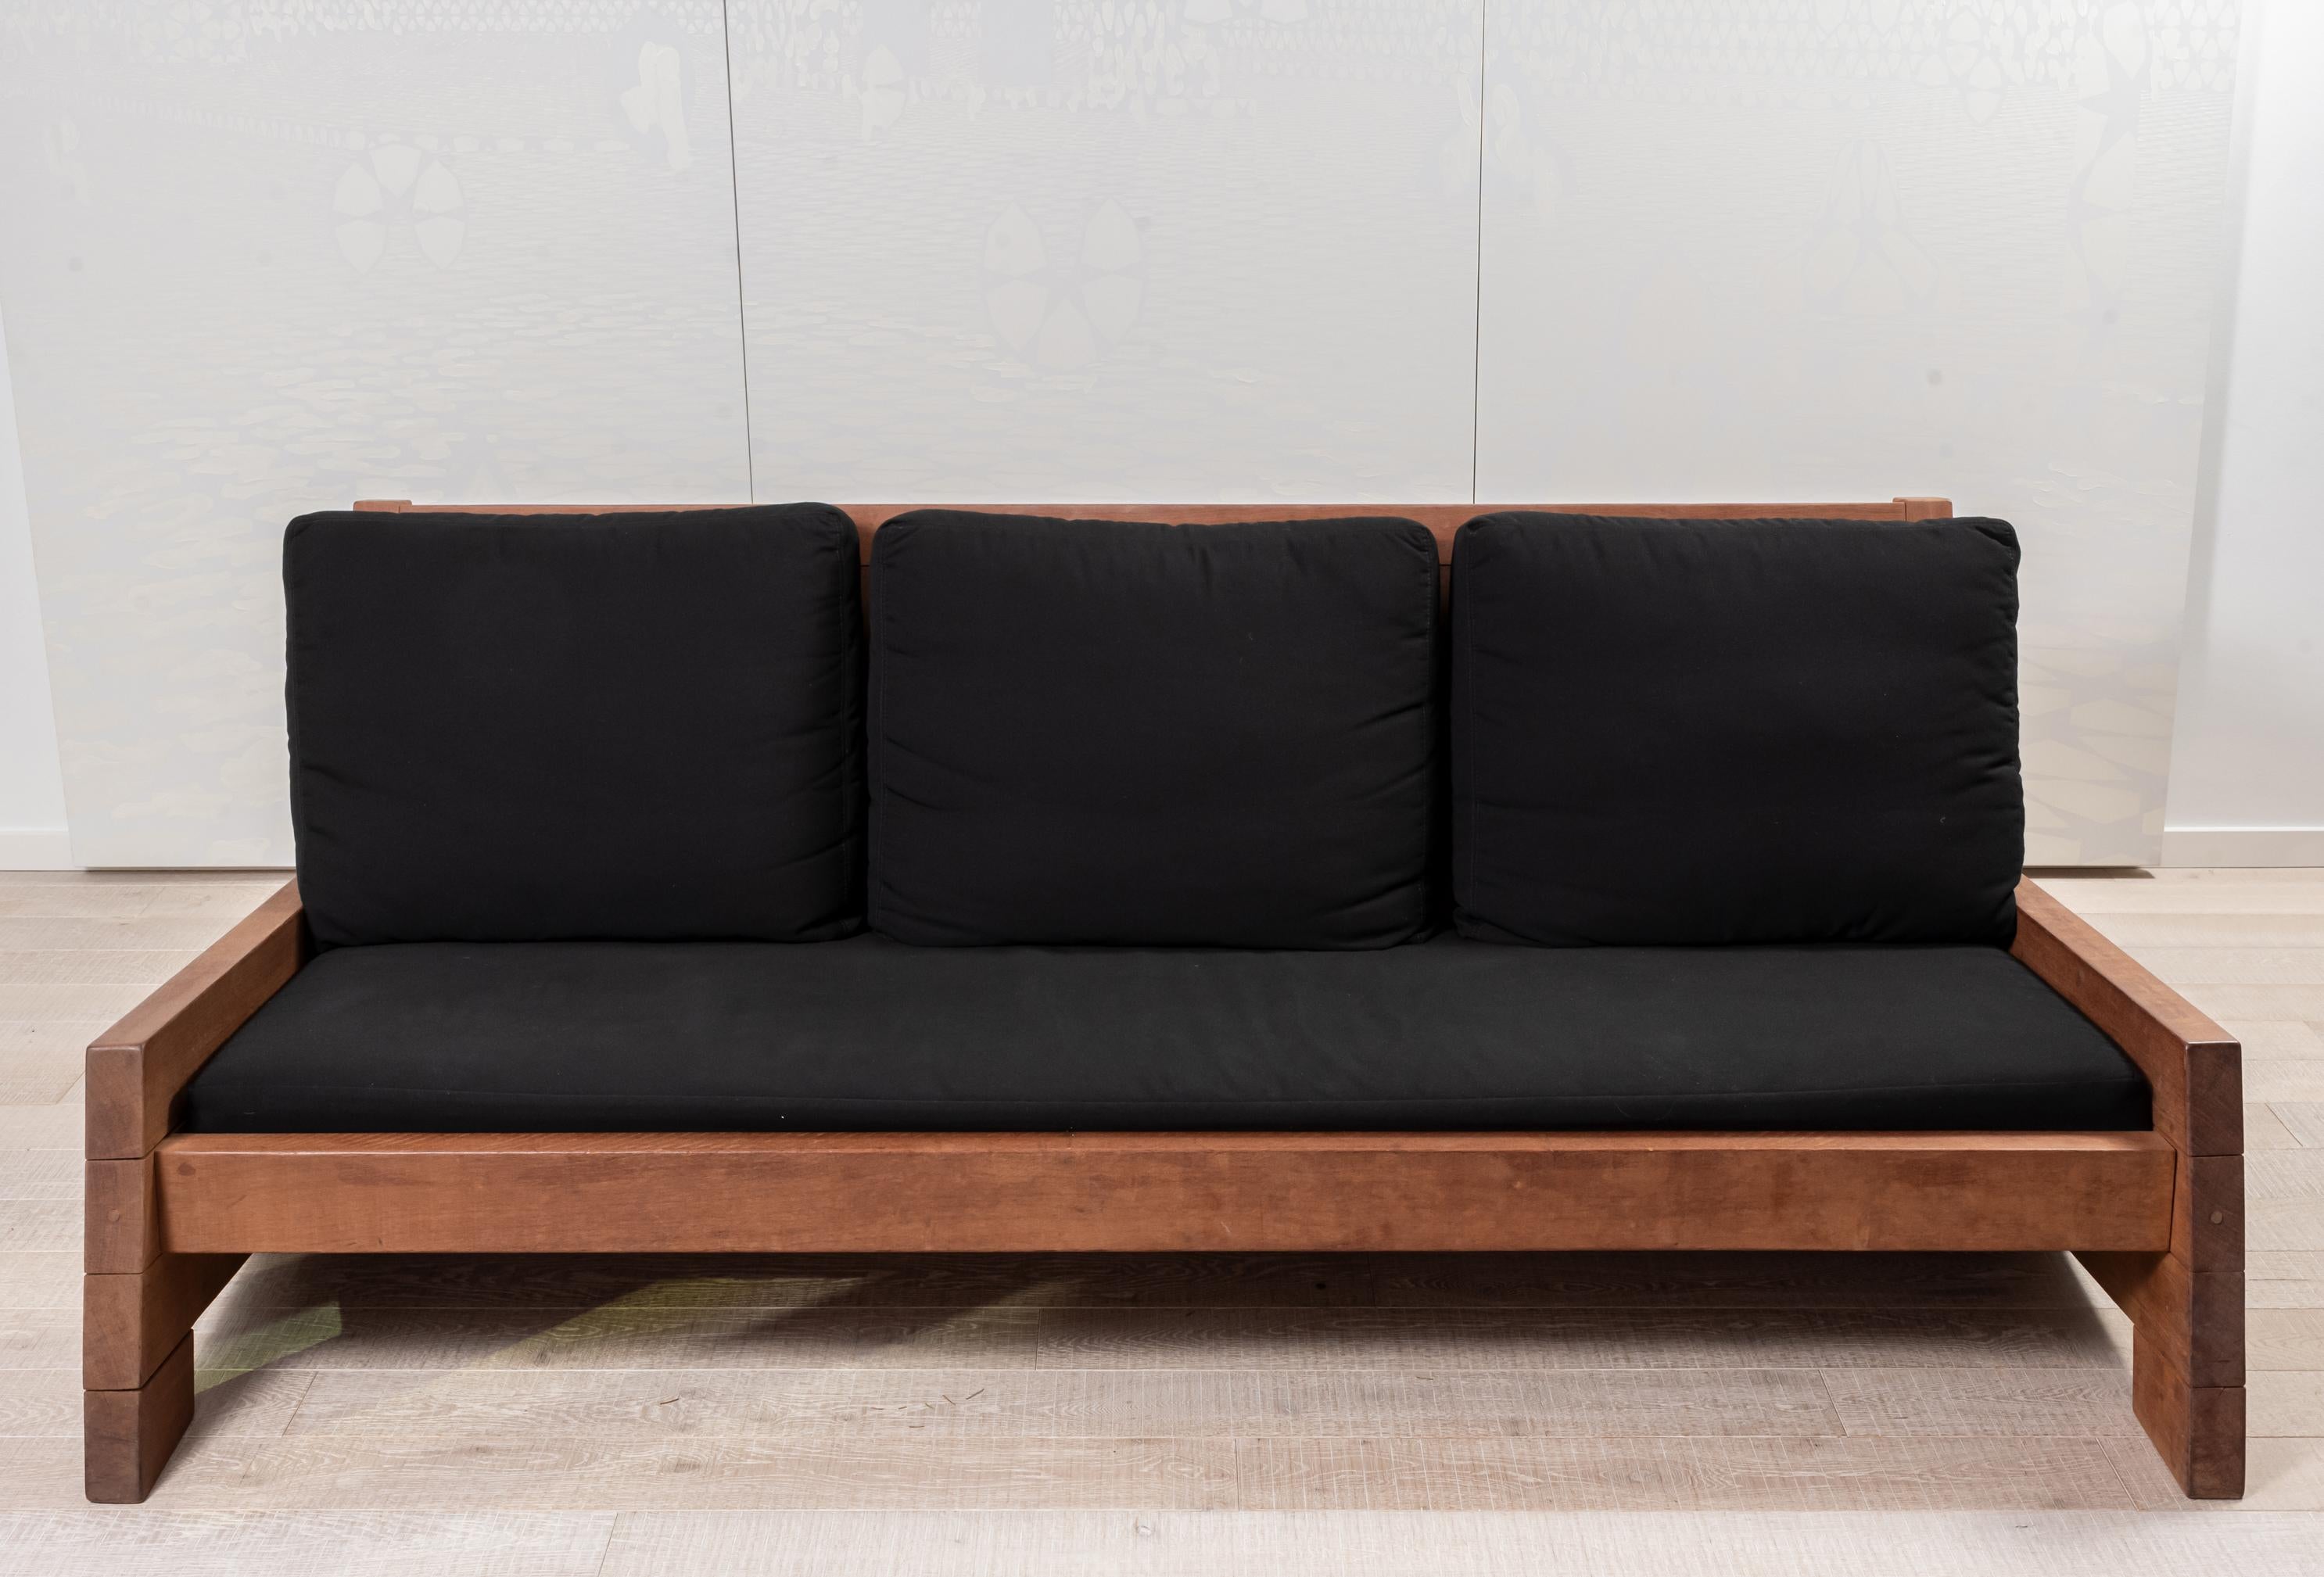 The Asturias sofa is a clean statement to any space.
Carlos Motta designed this line of furniture using reclaimed and post •demolition wood.
• Base structure made of Itauba Preta wood
• Suitable for both indoors and outdoors.